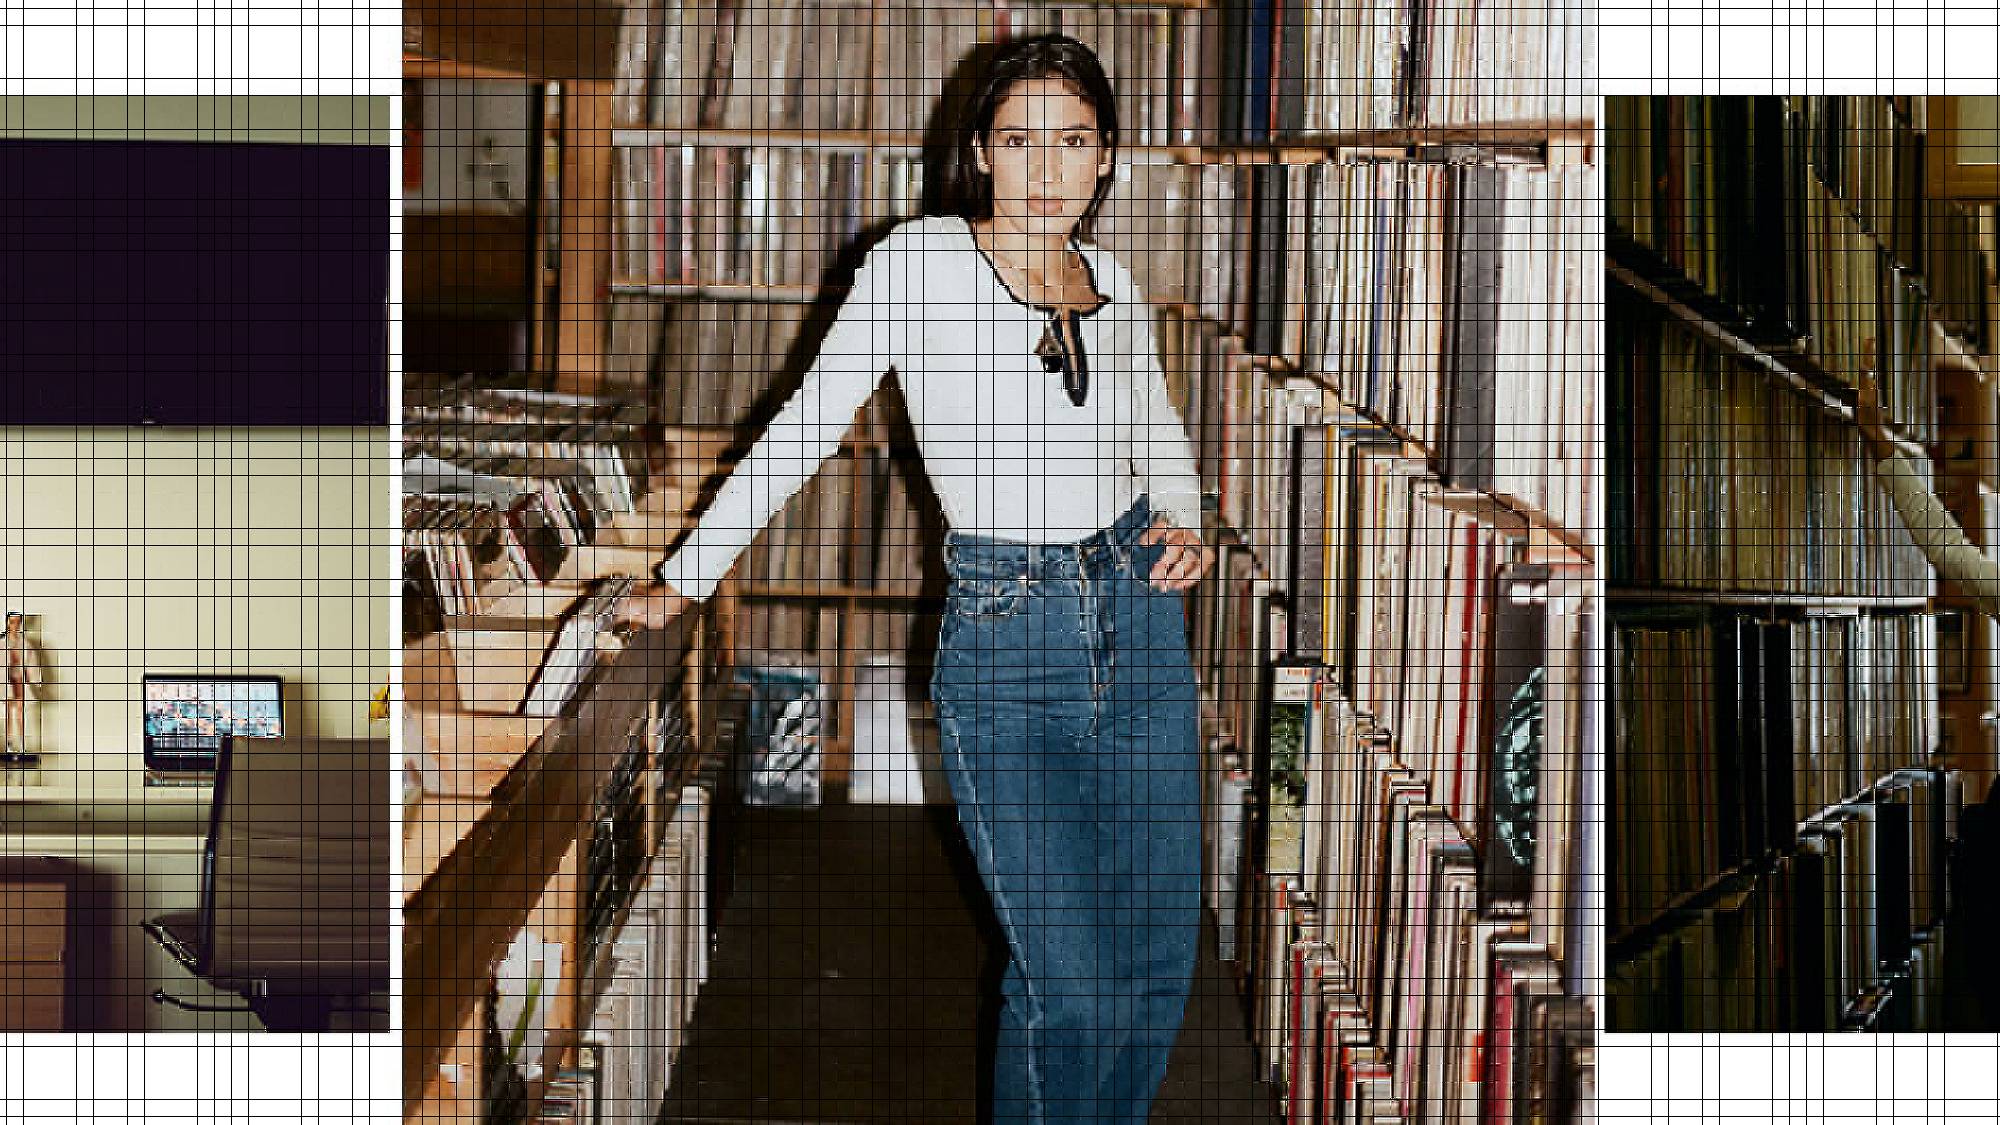 Portraits of ABIR in a record store.